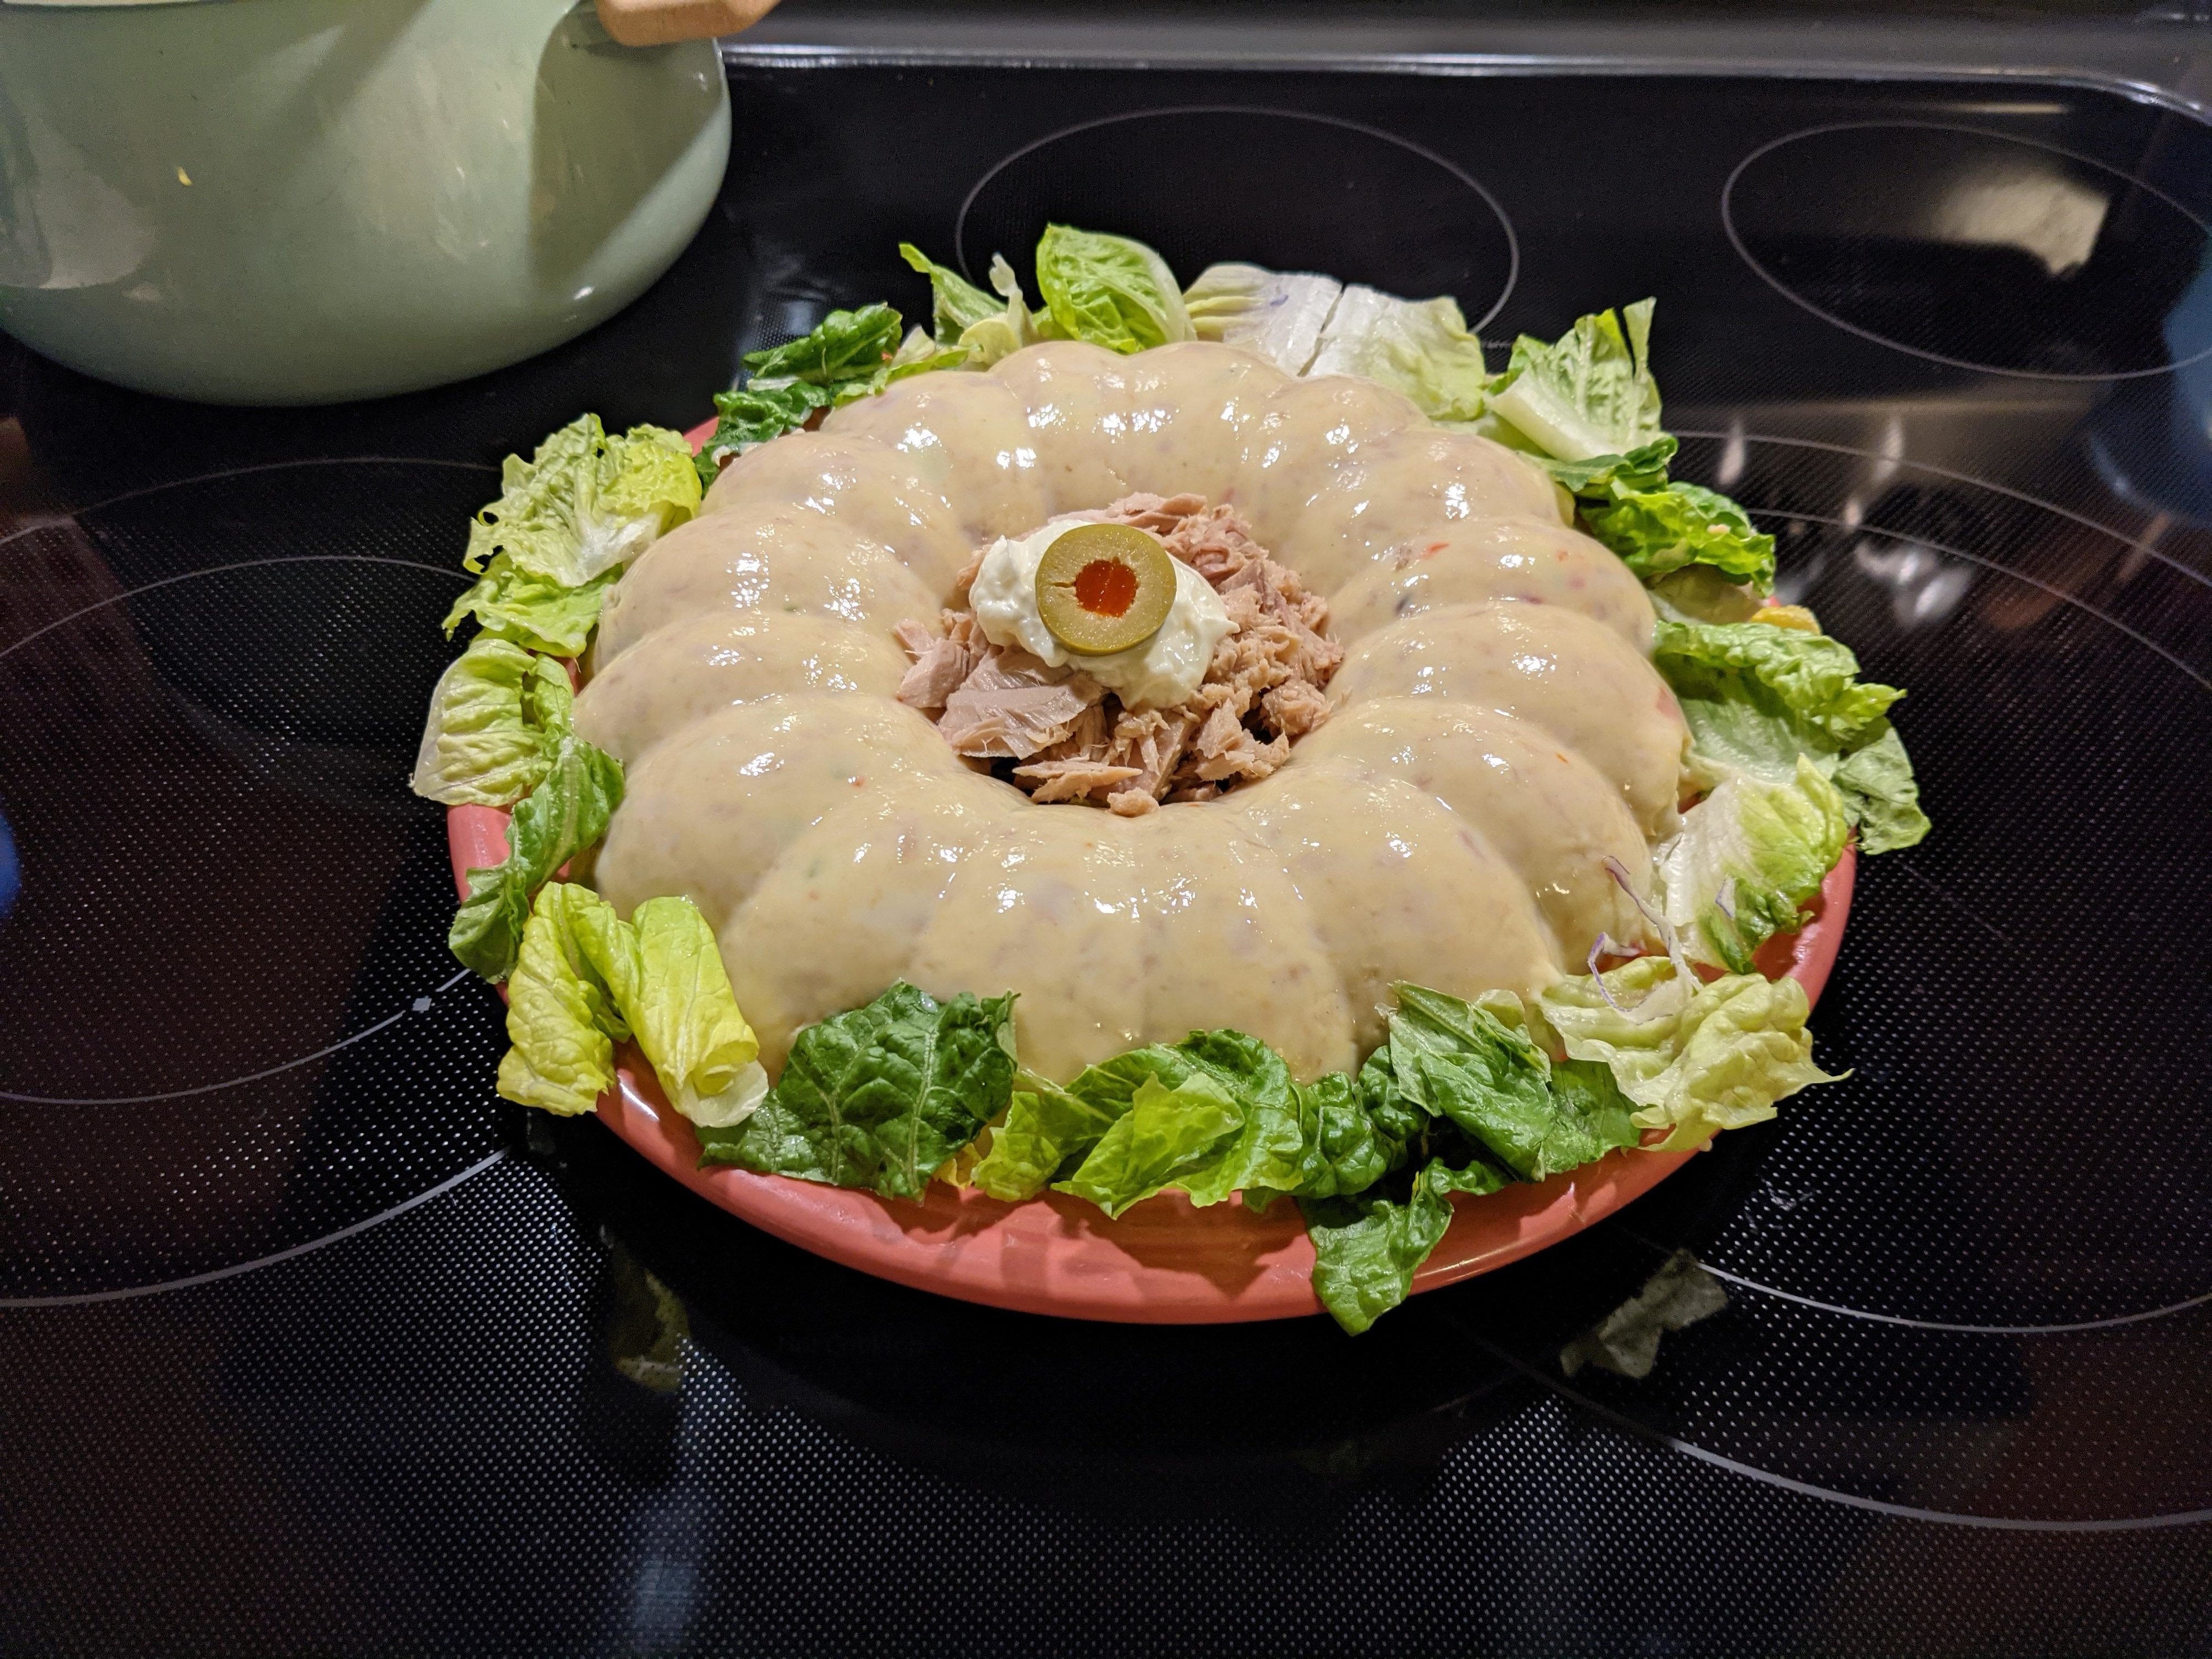 A gelatin salad with creamy dressing and tuna on a bed of lettuce